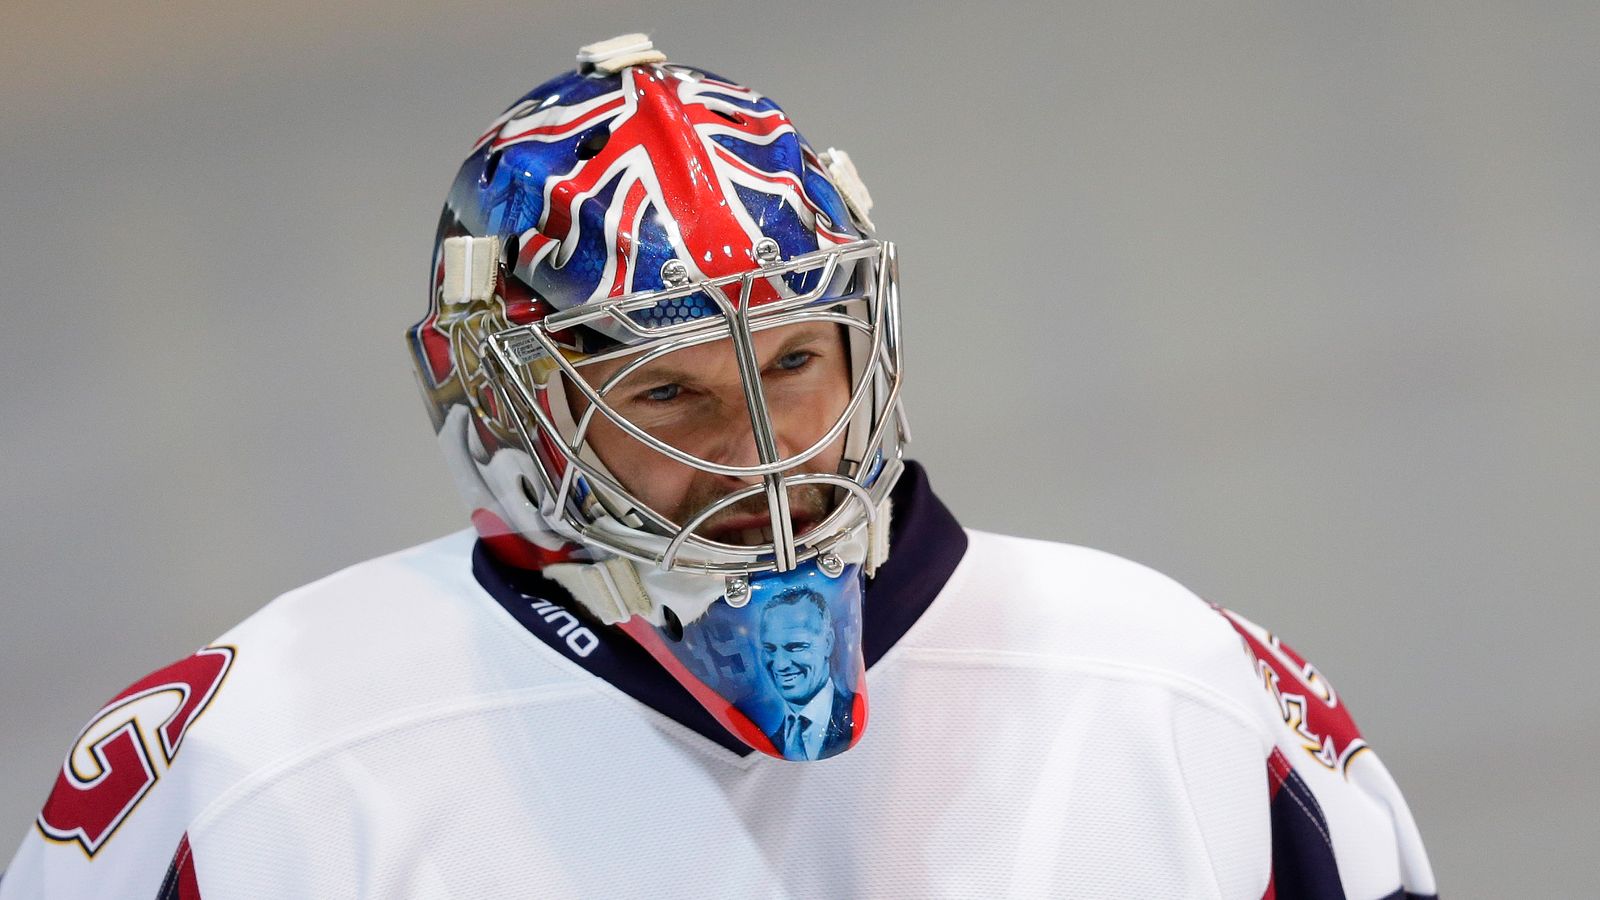 Petr Cech fulfils childhood dream in ice hockey debut for Guildford Phoenix Ice Hockey News Sky Sports